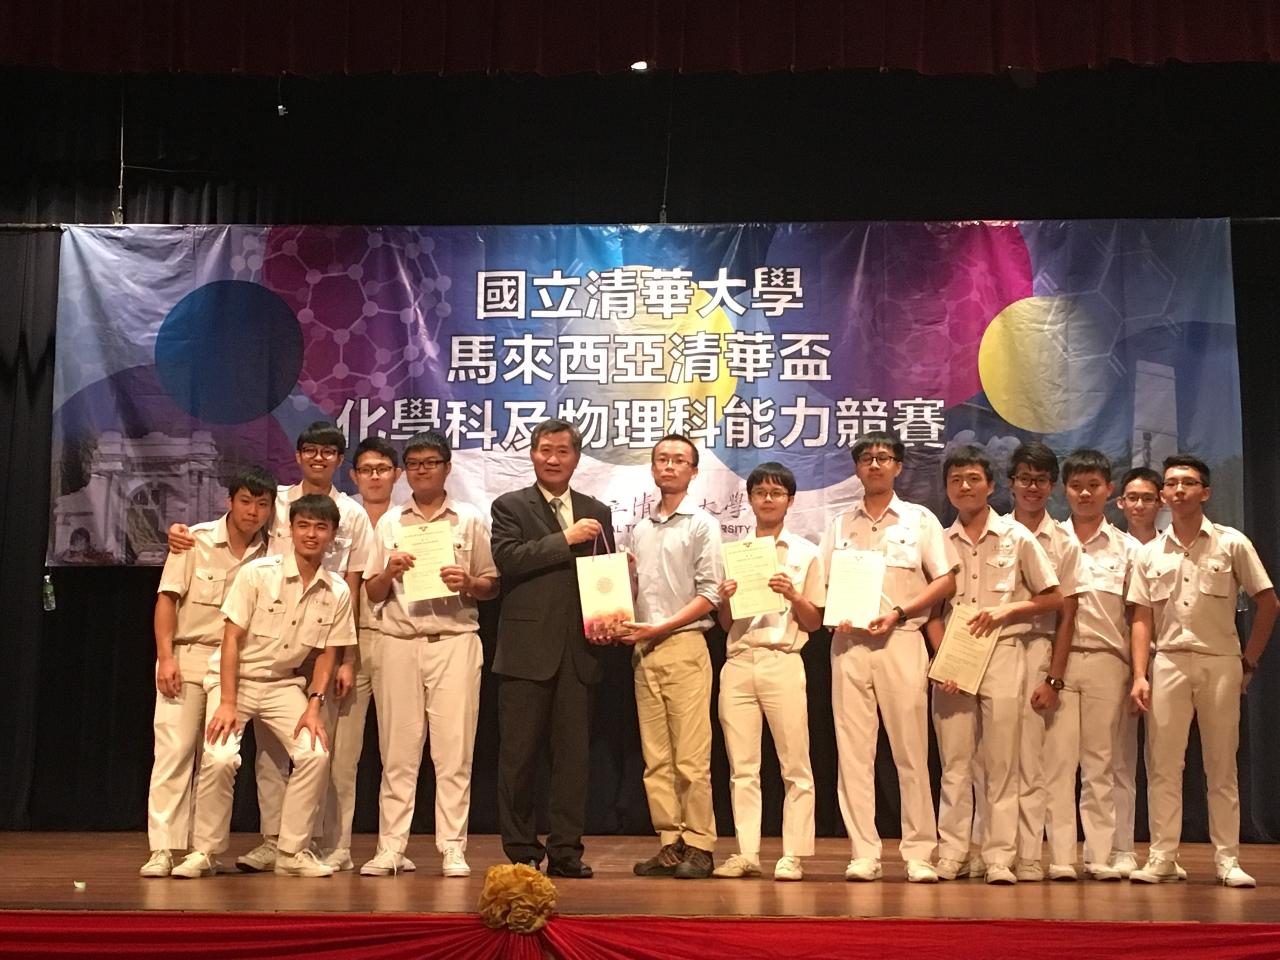 Deputy Representative Michael S.Y.Yiin issued Malaysia Tsing Hua University Alumni Association 2018 Science Chem Contest Certificate of Foong Yew High Scool Science Chem team.